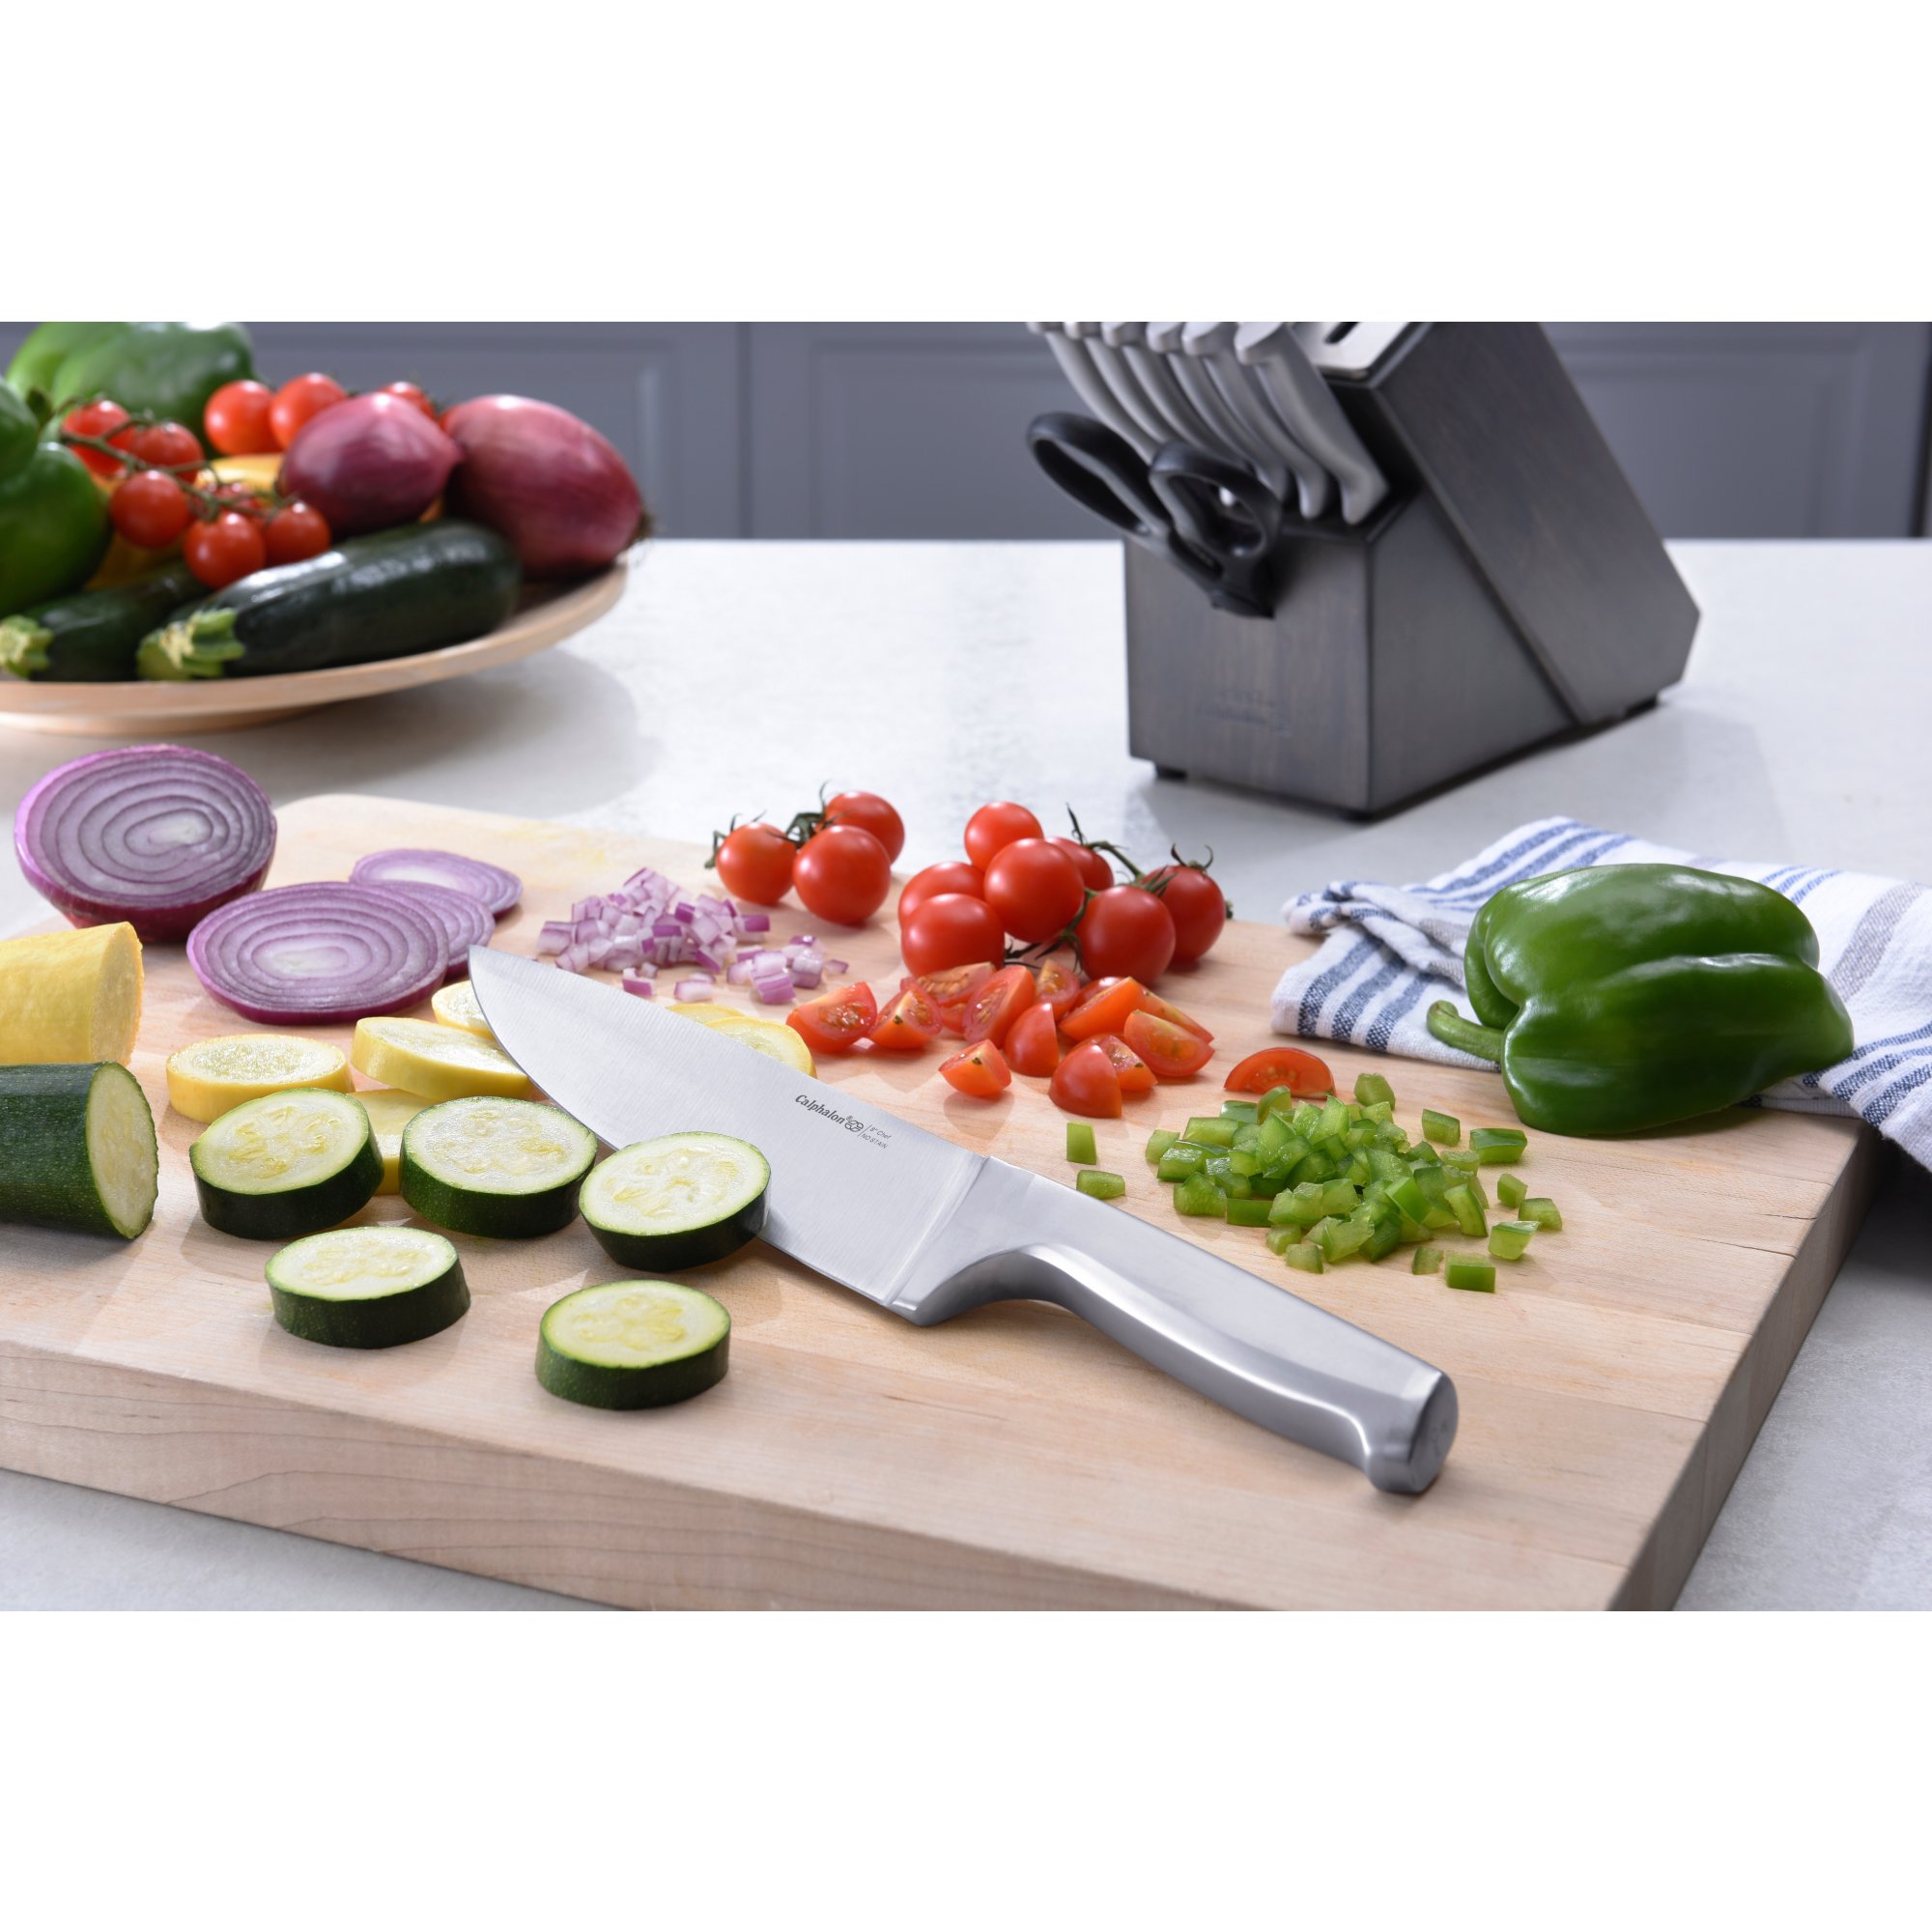 https://newellbrands.scene7.com/is/image/NewellRubbermaid/SAP-calphalon-select-stainless-steel-chef-knife-with-food-lifestyle?wid=2000&hei=2000